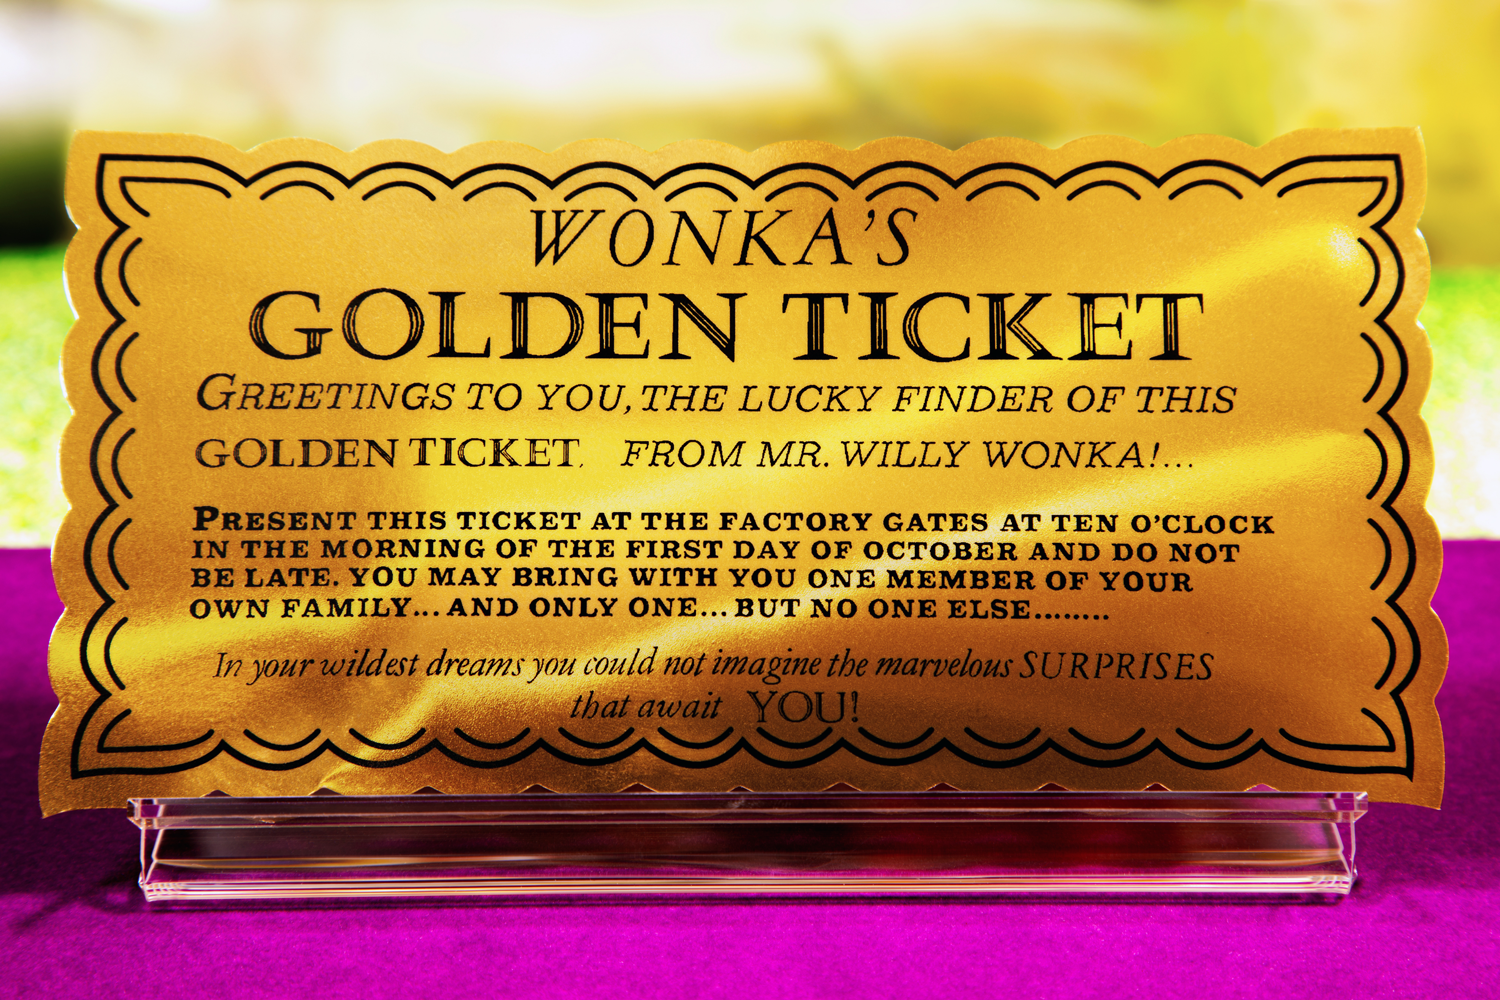 1971 Willy Wonka Candy Prop Wonka Bar WITH CHOCOLATE + Golden Ticket  Replica